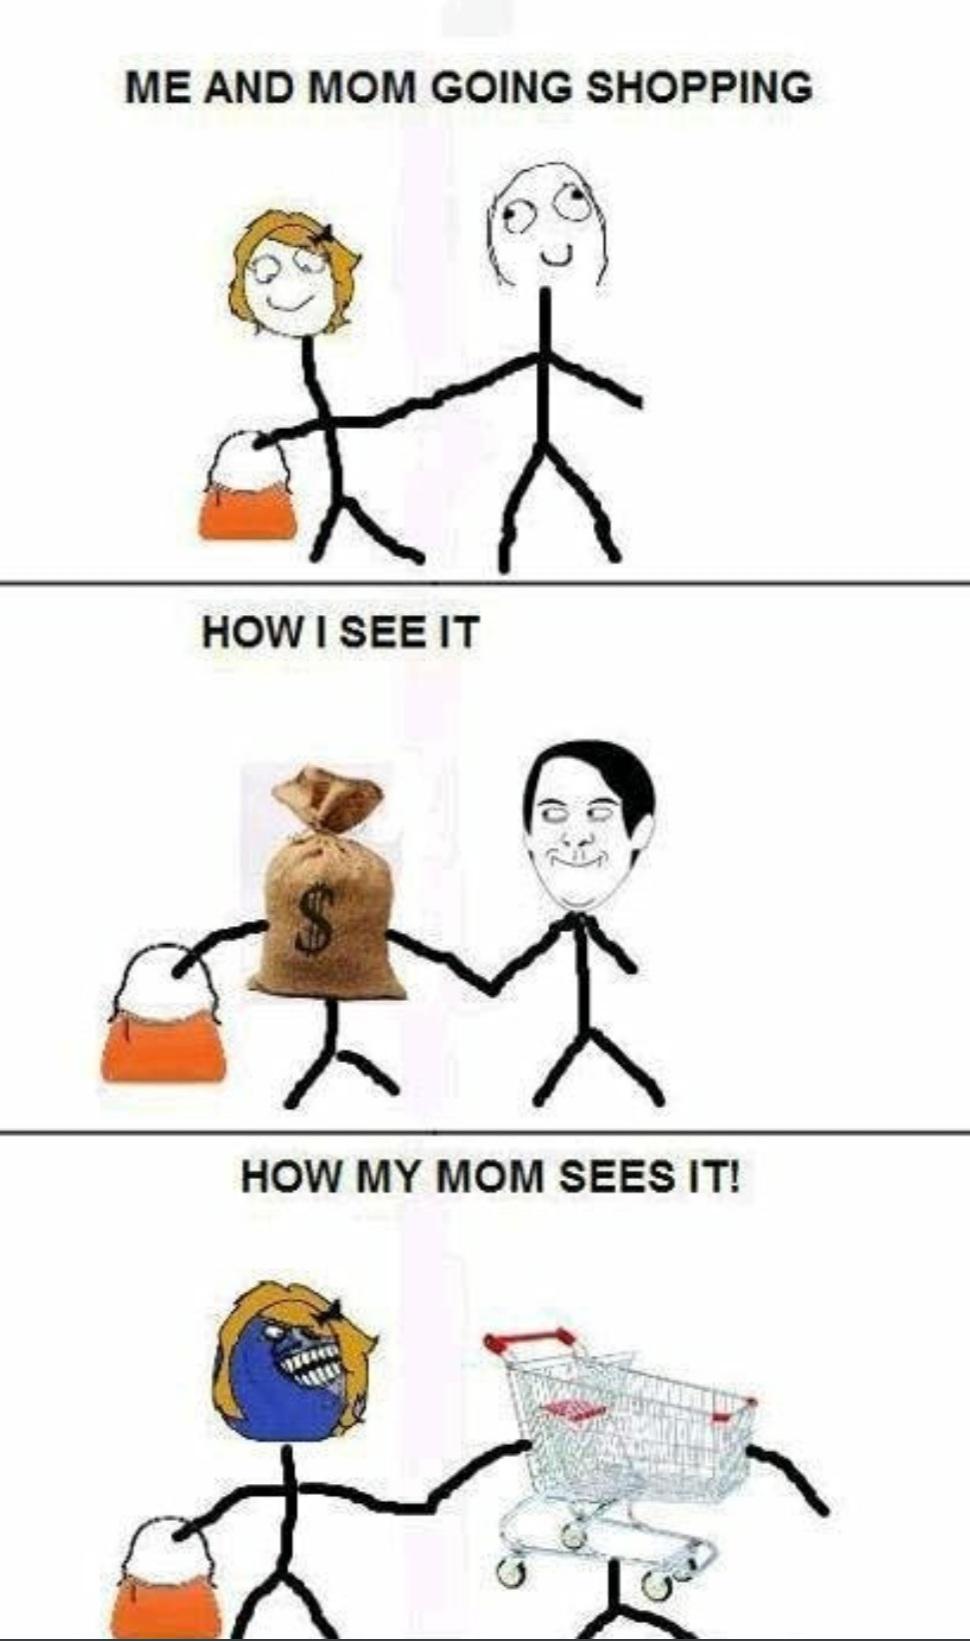 Cringe, Unironically, Facebook cringe memes Cringe, Unironically, Facebook text: ME AND MOM GOING SHOPPING HOW I SEE IT HOW MY MOM SEES IT! 